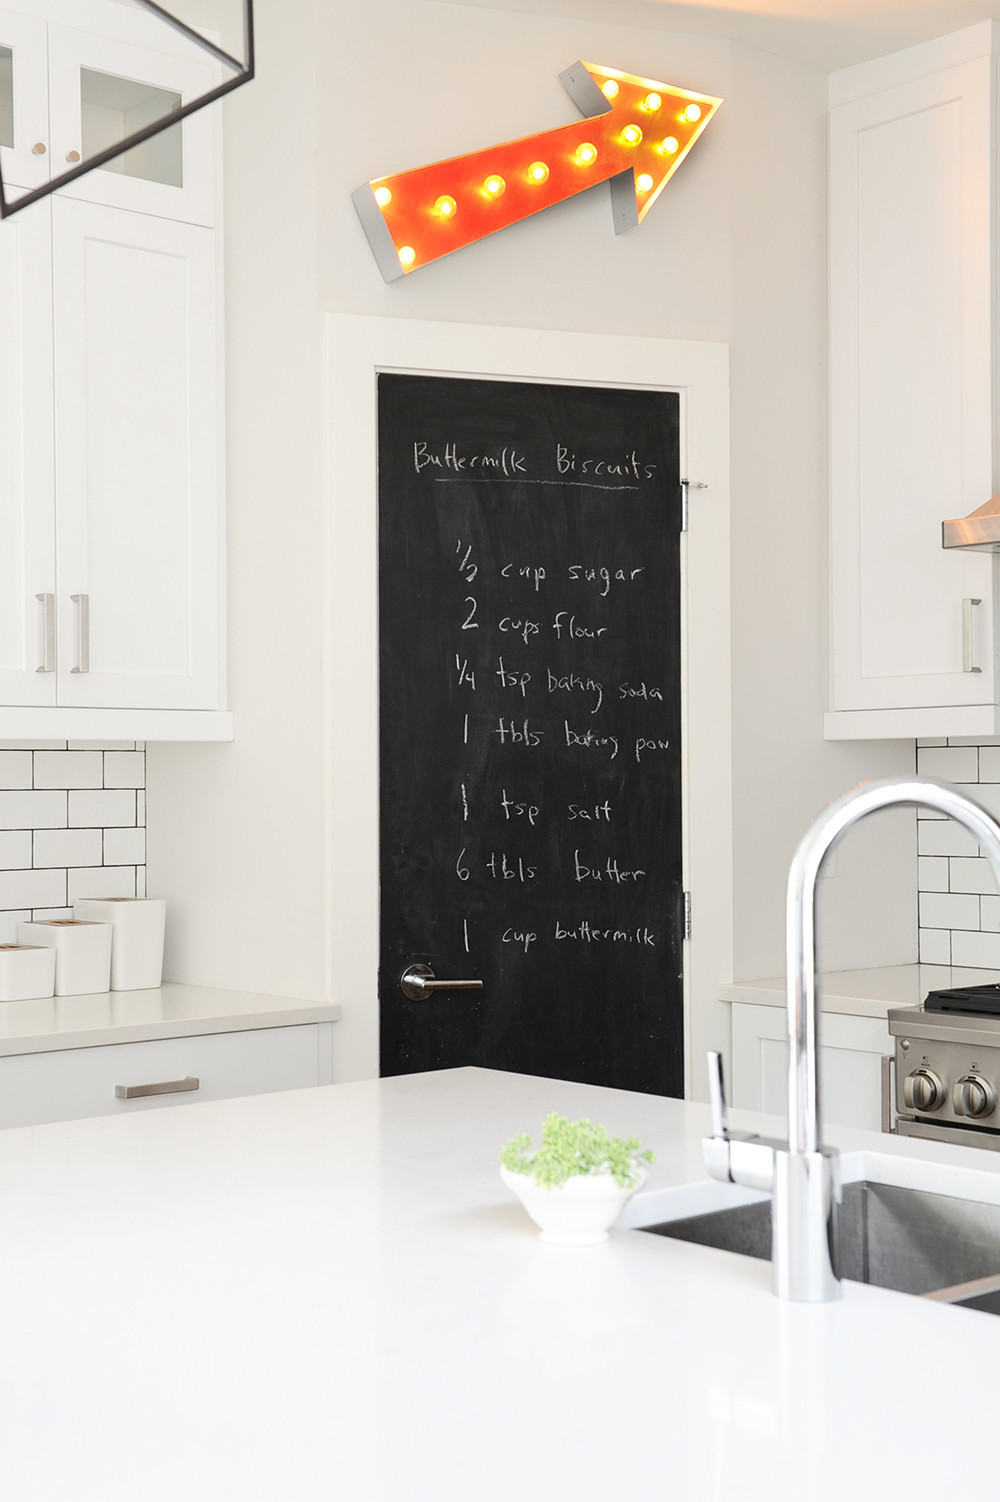 A kitchen door leading to the basement painted in chalkboard paint with notes written on it